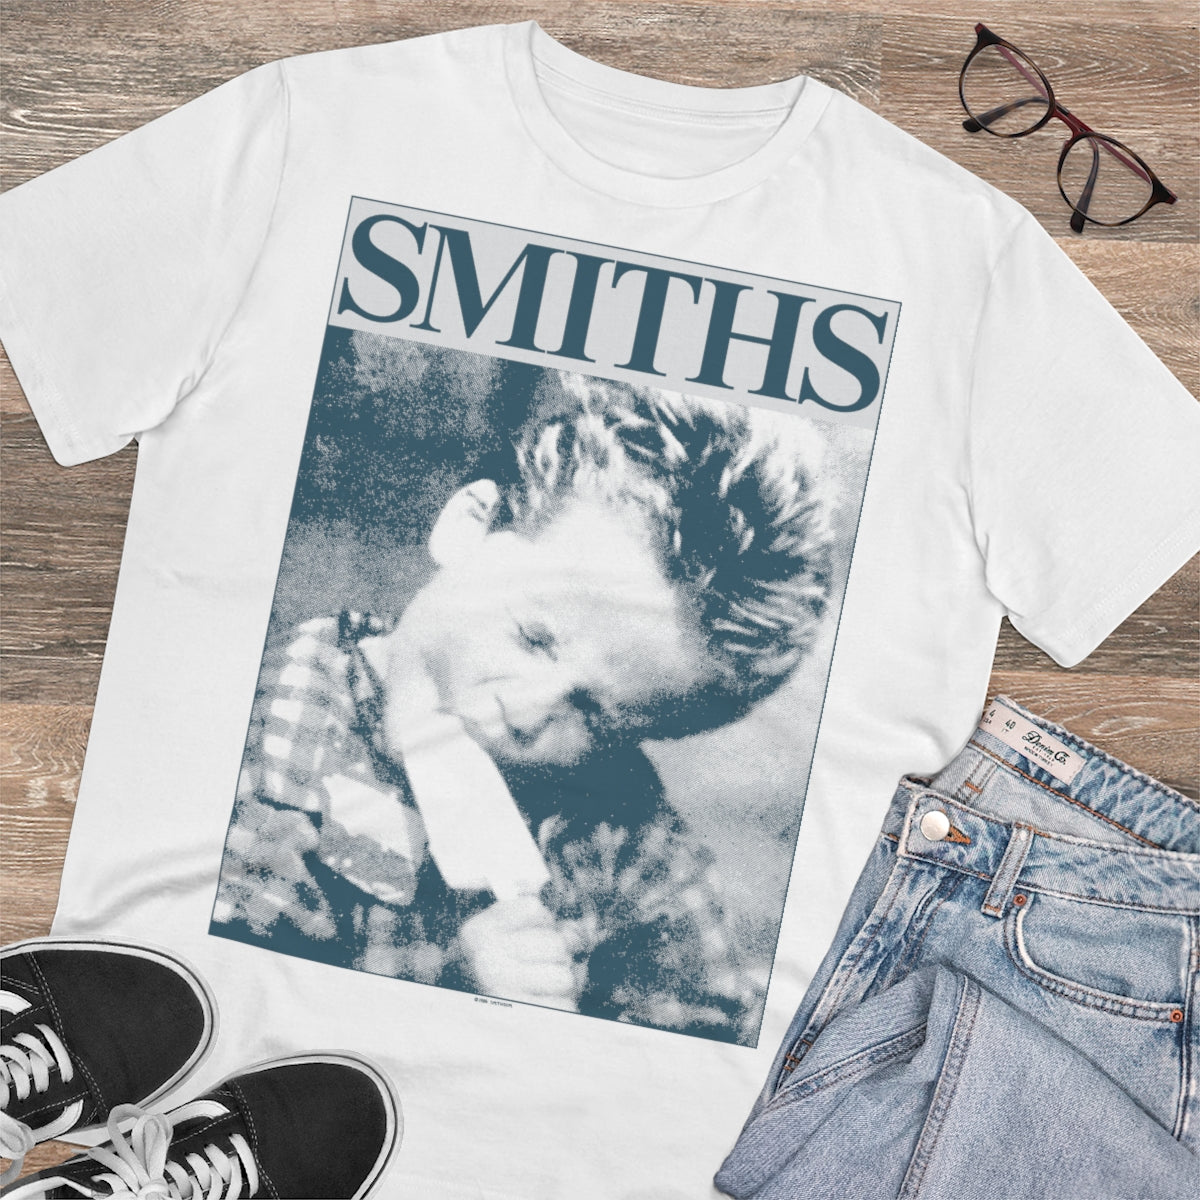 THE SMITHS - 'Boy With Lolly' - Smithdom - 1986 - US Blue